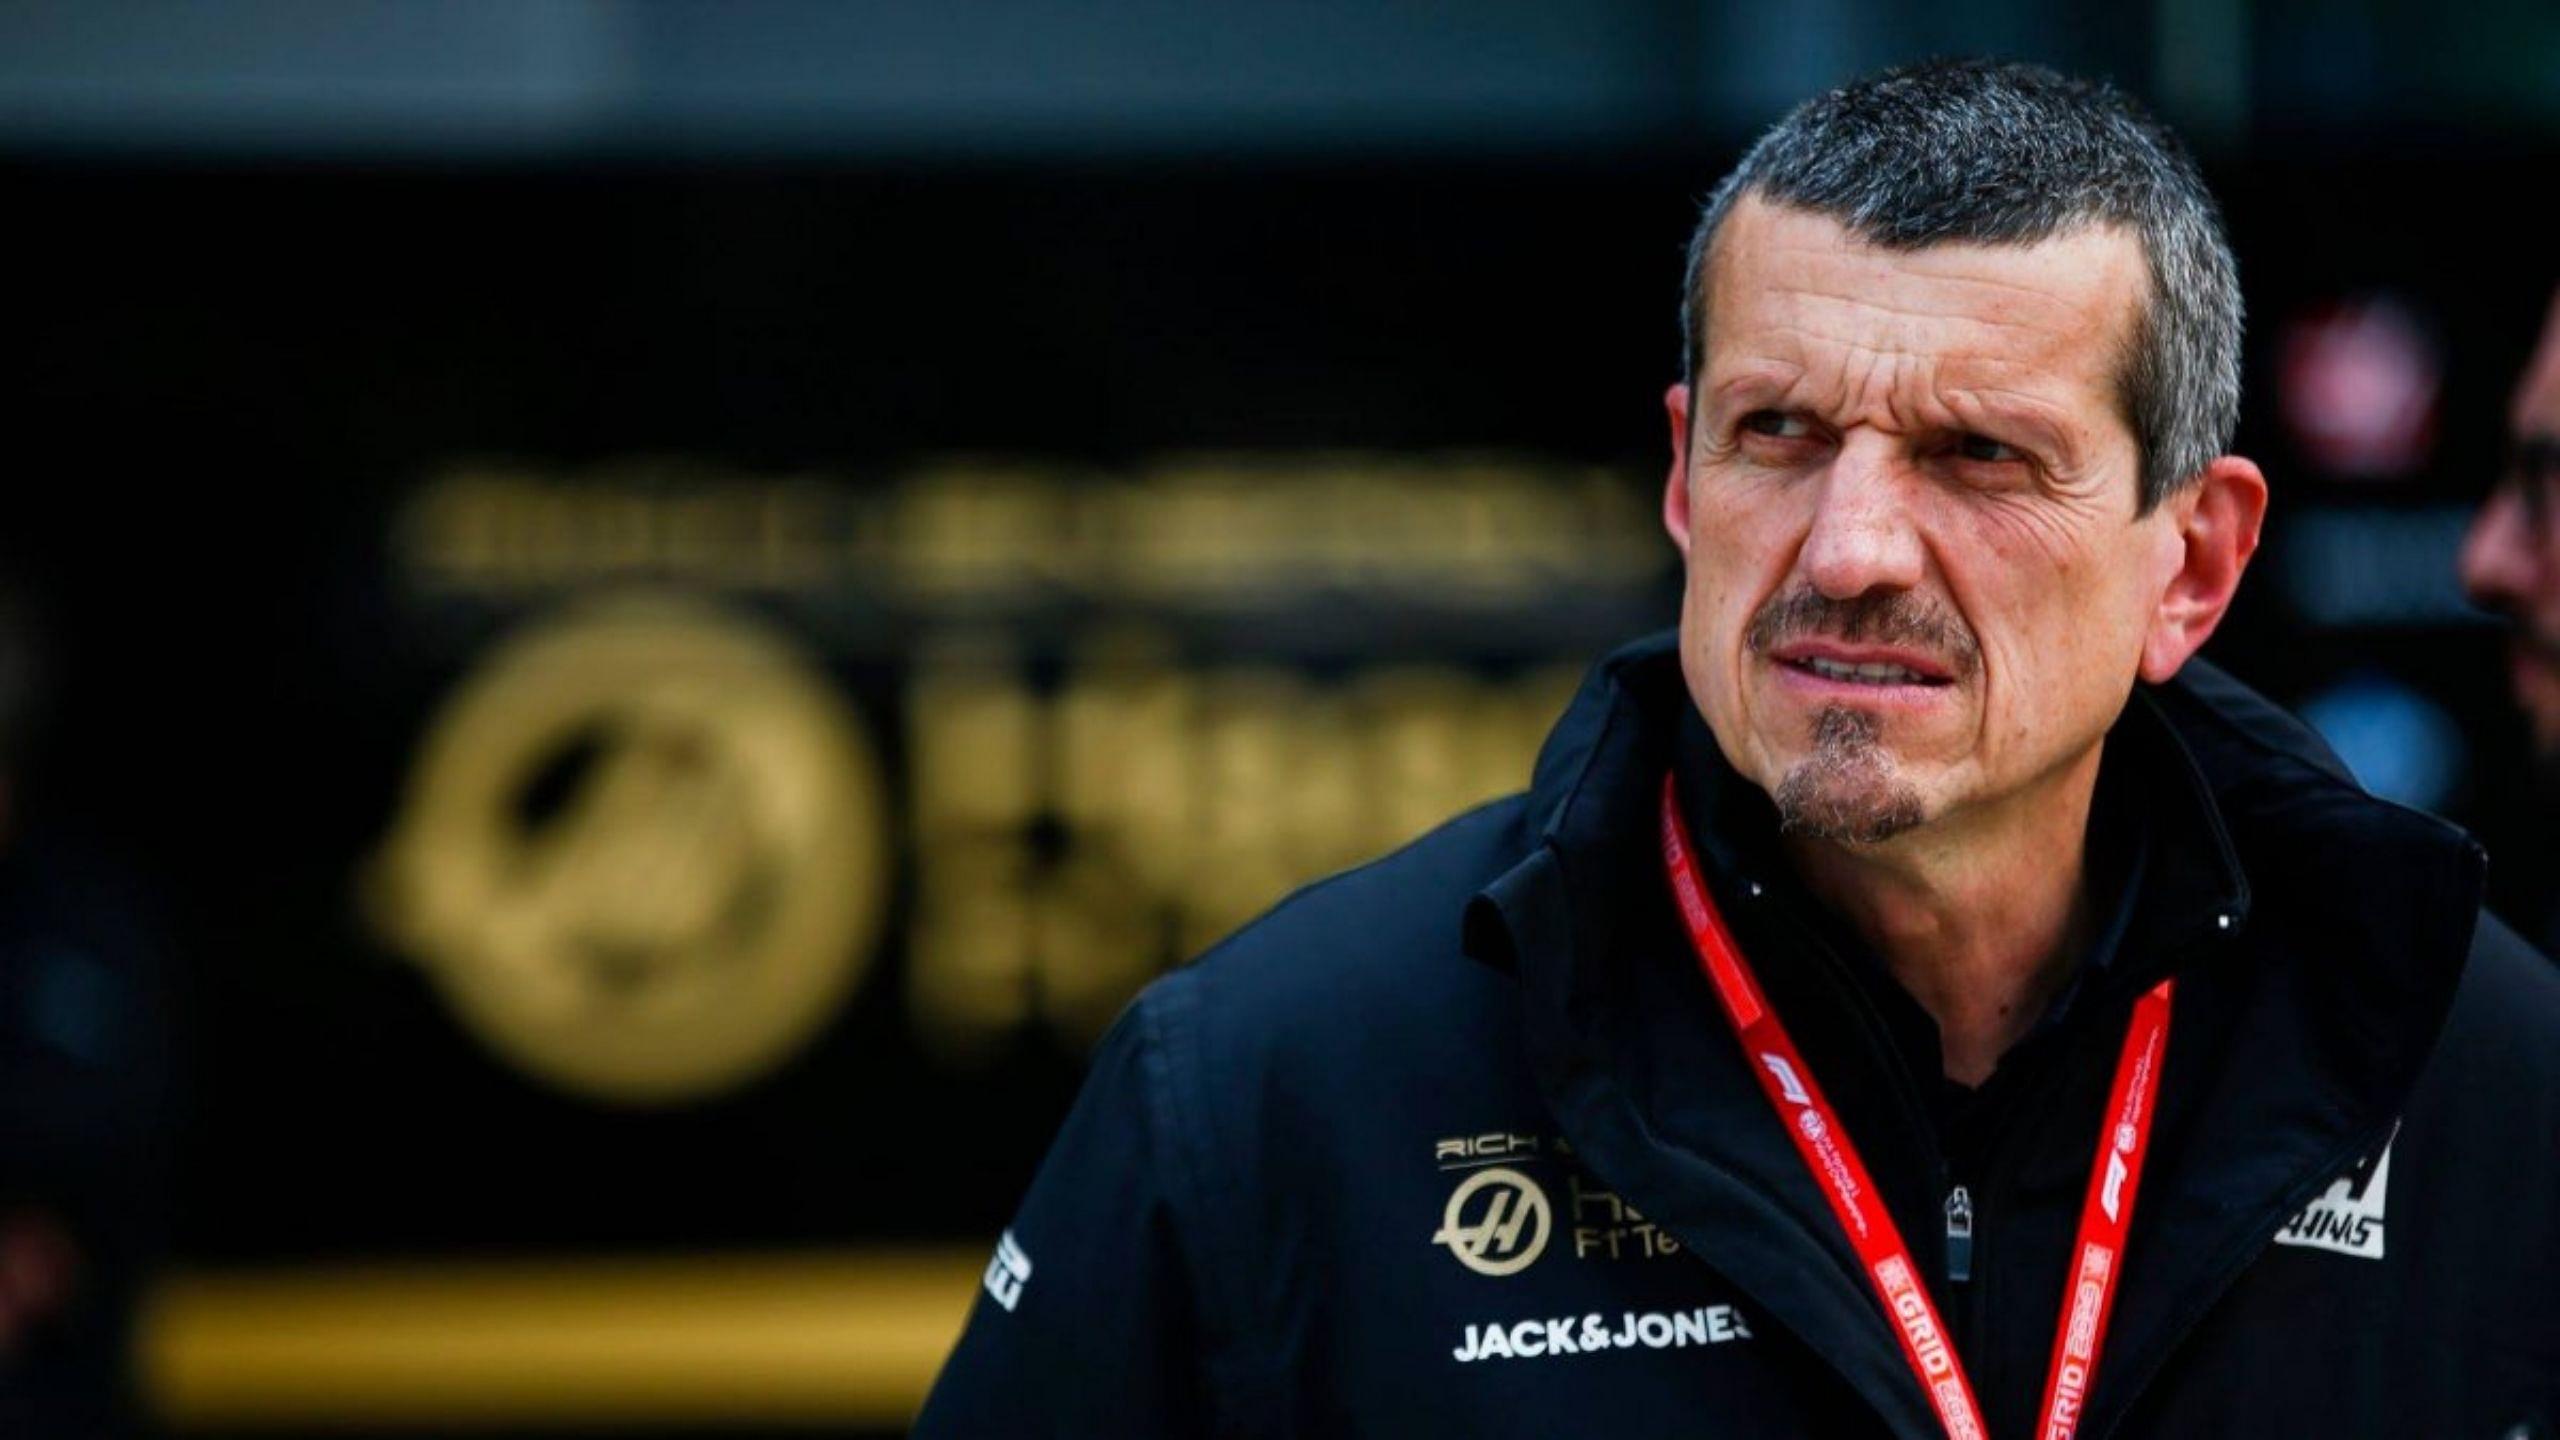 "There are a lot of people knocking on the door for these jobs" - Haas F1 boss Guenther Steiner believes F1 budget cap will cut jobs